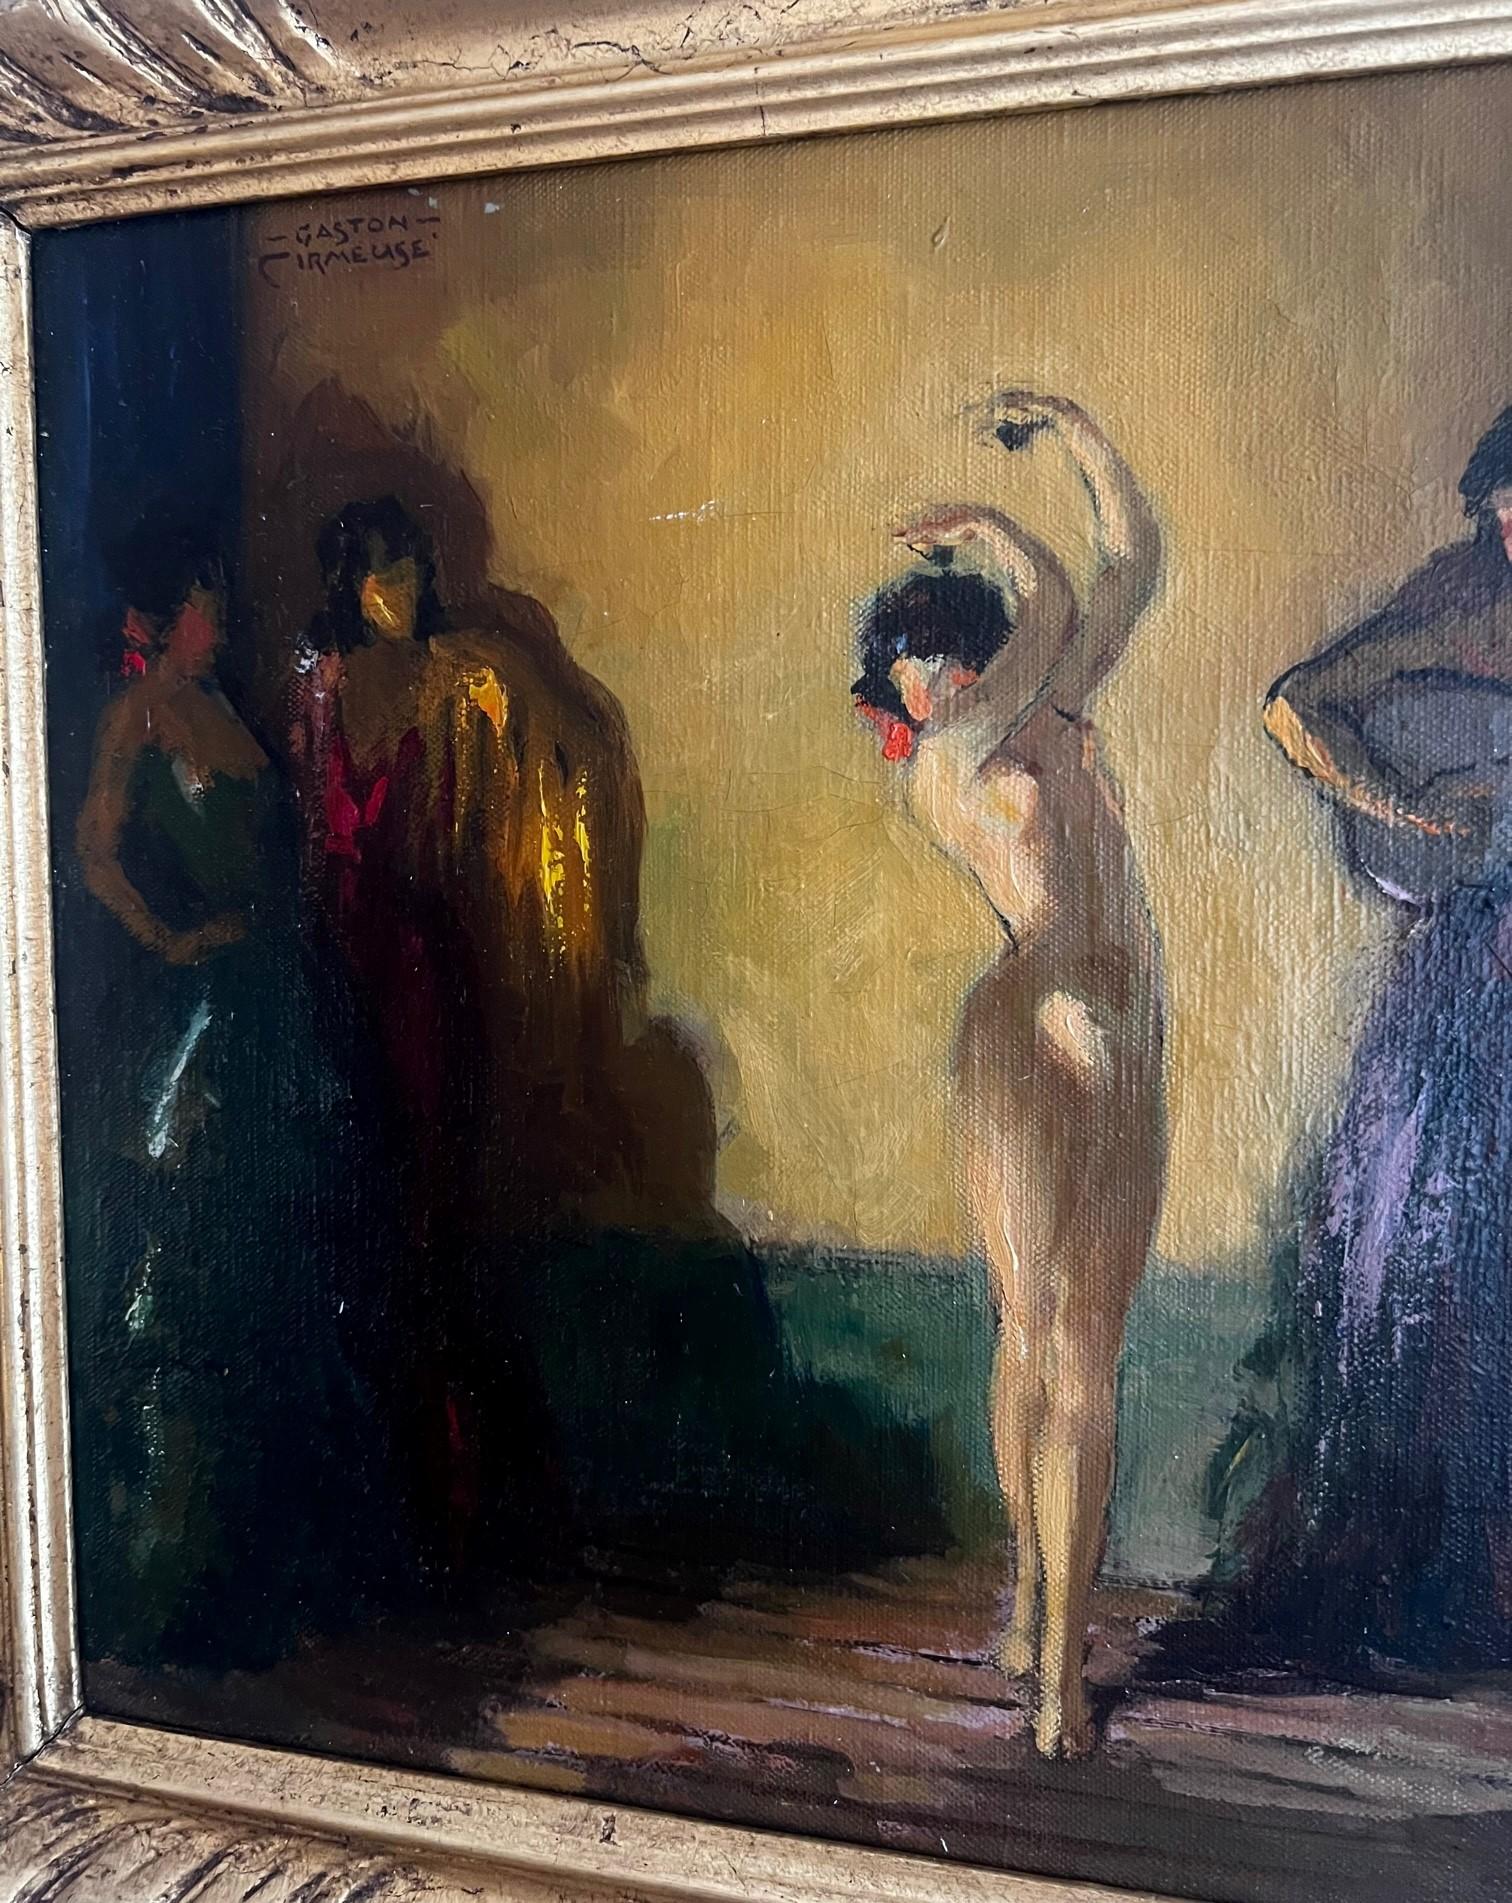 Gaston Cirmeuse was born in Marseilles in 1886 and was a student of F. Cormon. He is known as Orientalist painter and the theme of nude females dancing, bathing or posing was the theme he worked with frequently and for which he gained renown. This